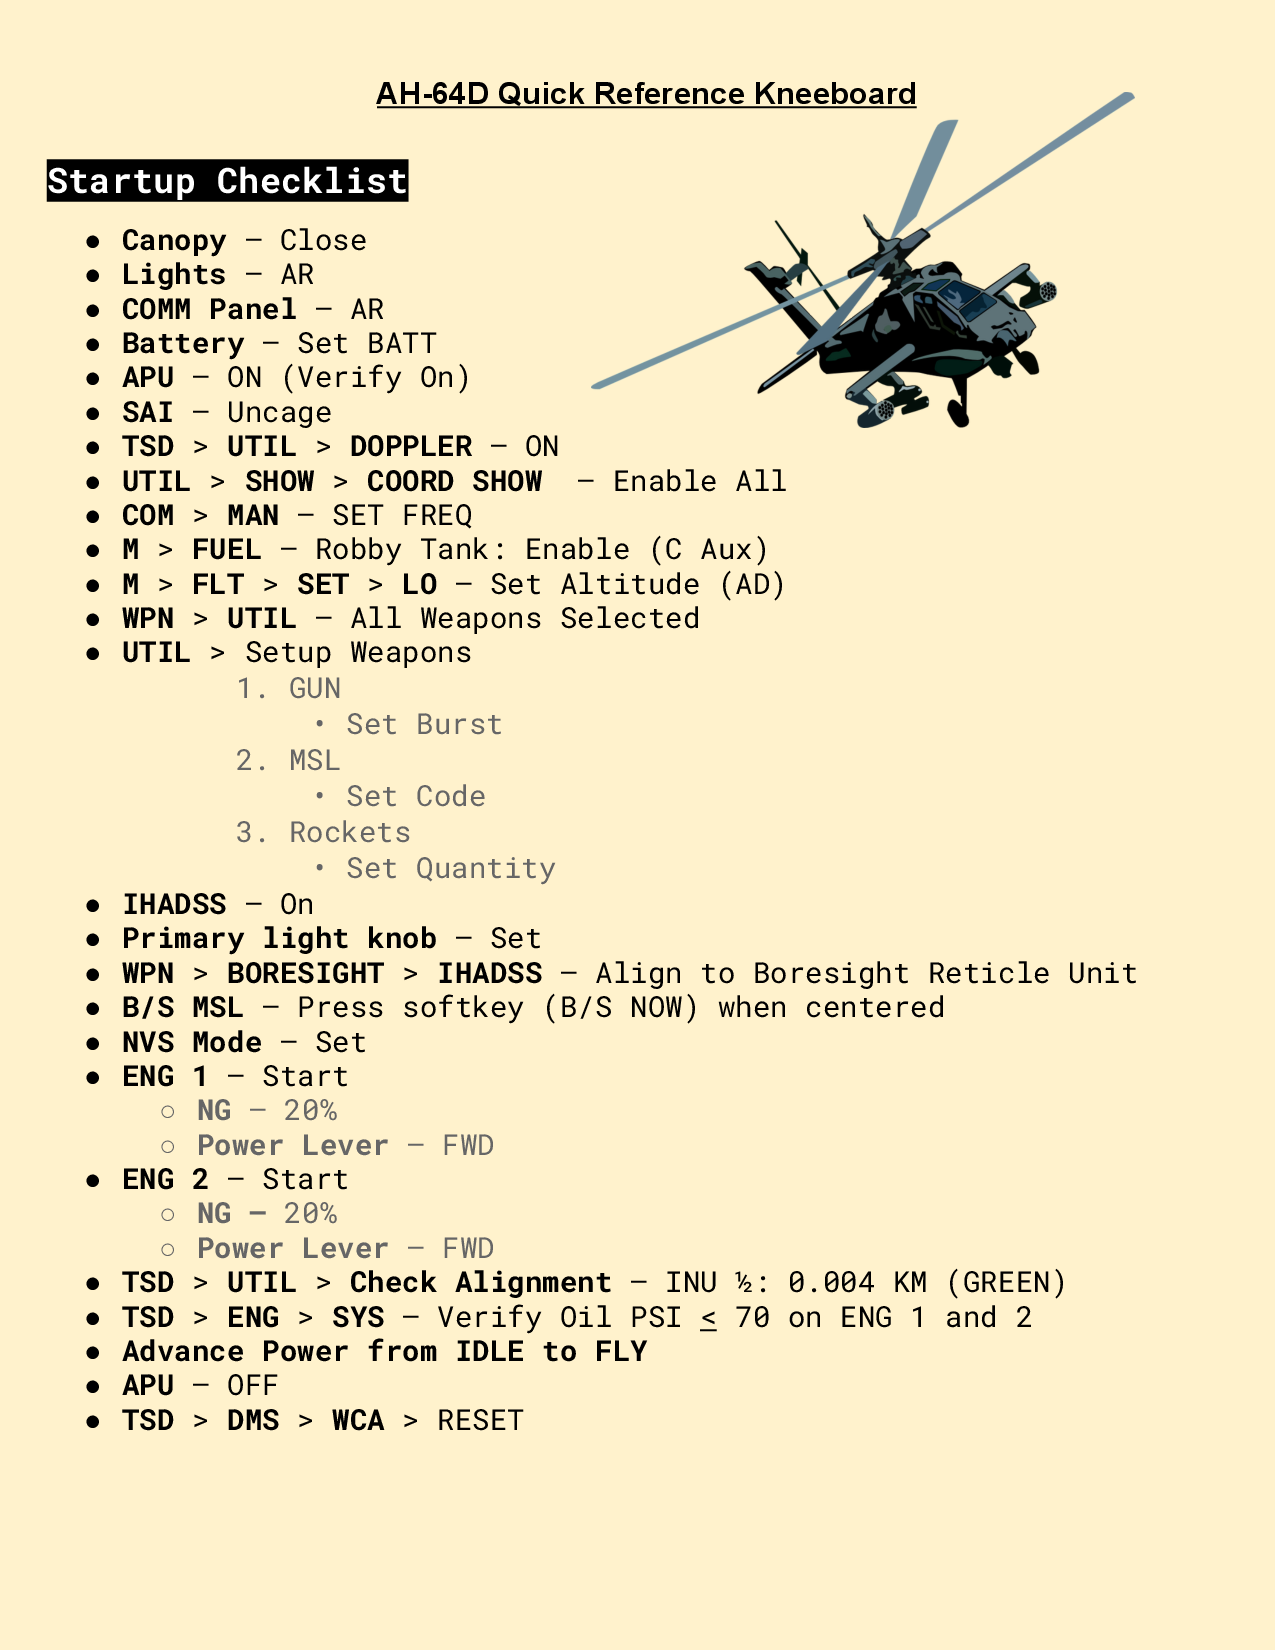 AH-64D Apache Quick Reference Kneeboard and Checklists By: Hayden